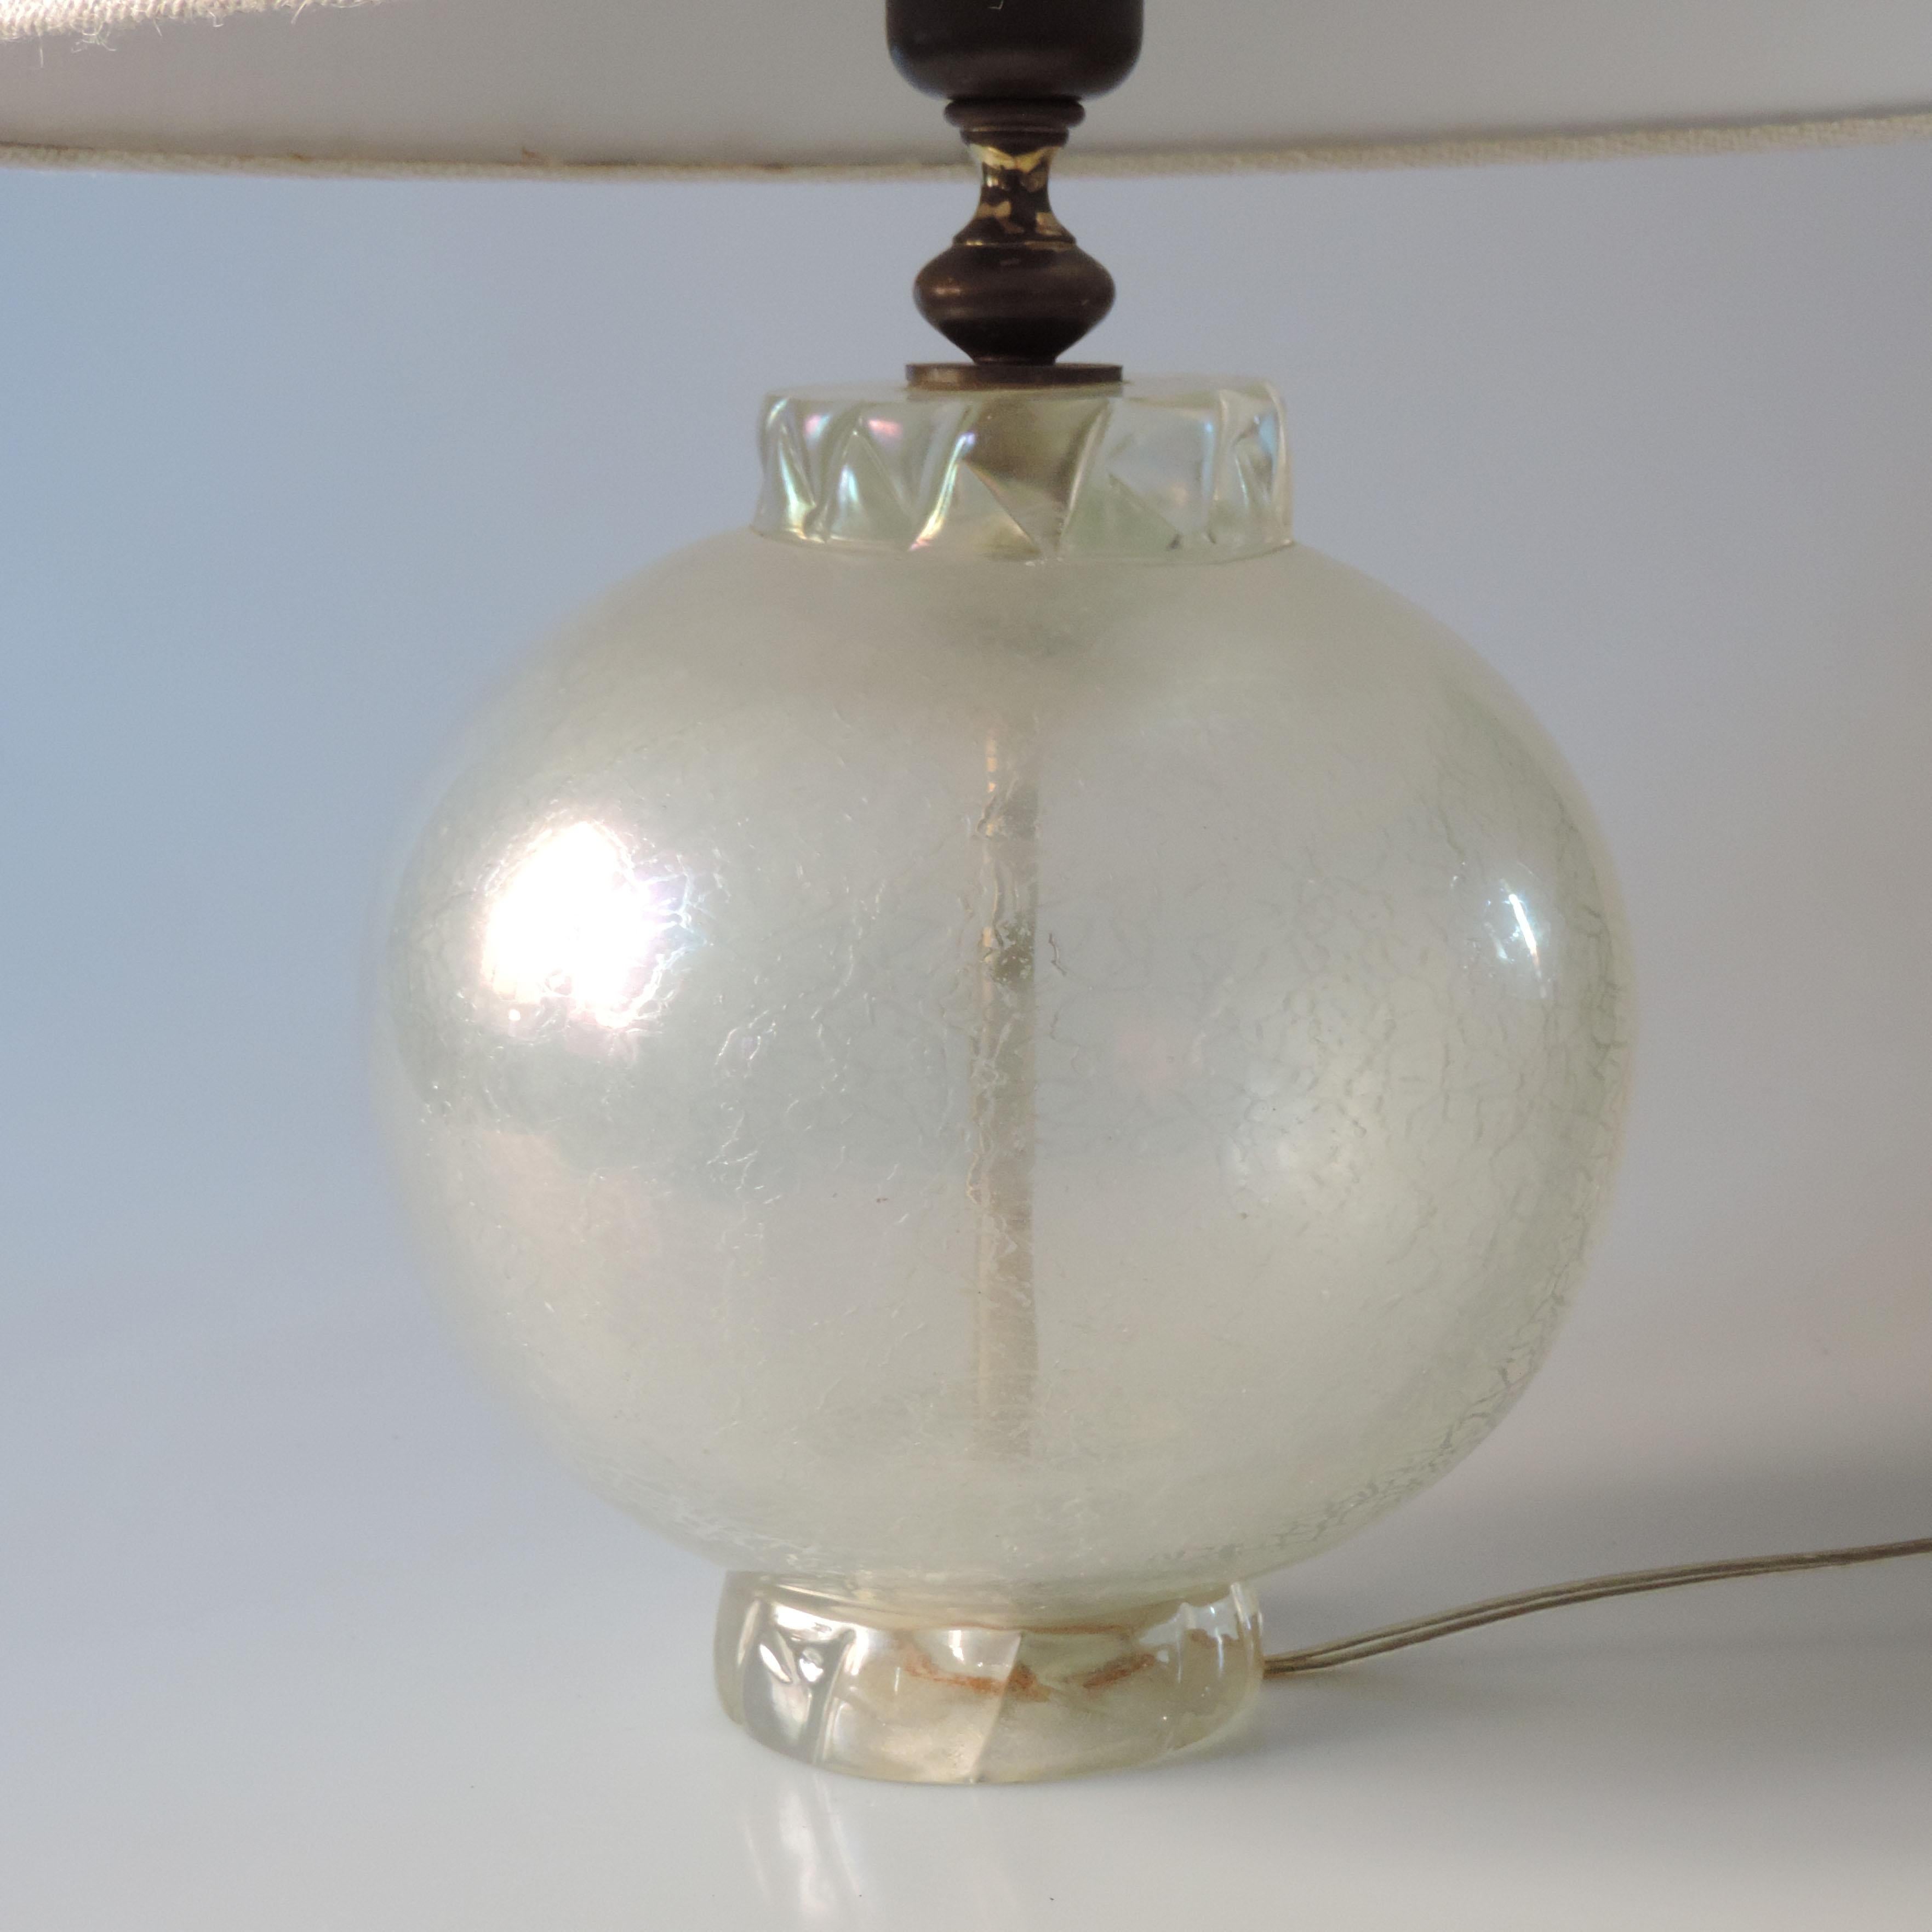 Murano glass iridescent globe table lamp, Italy 1940s
Measurement without shade diameter 23 x height 23 cm.